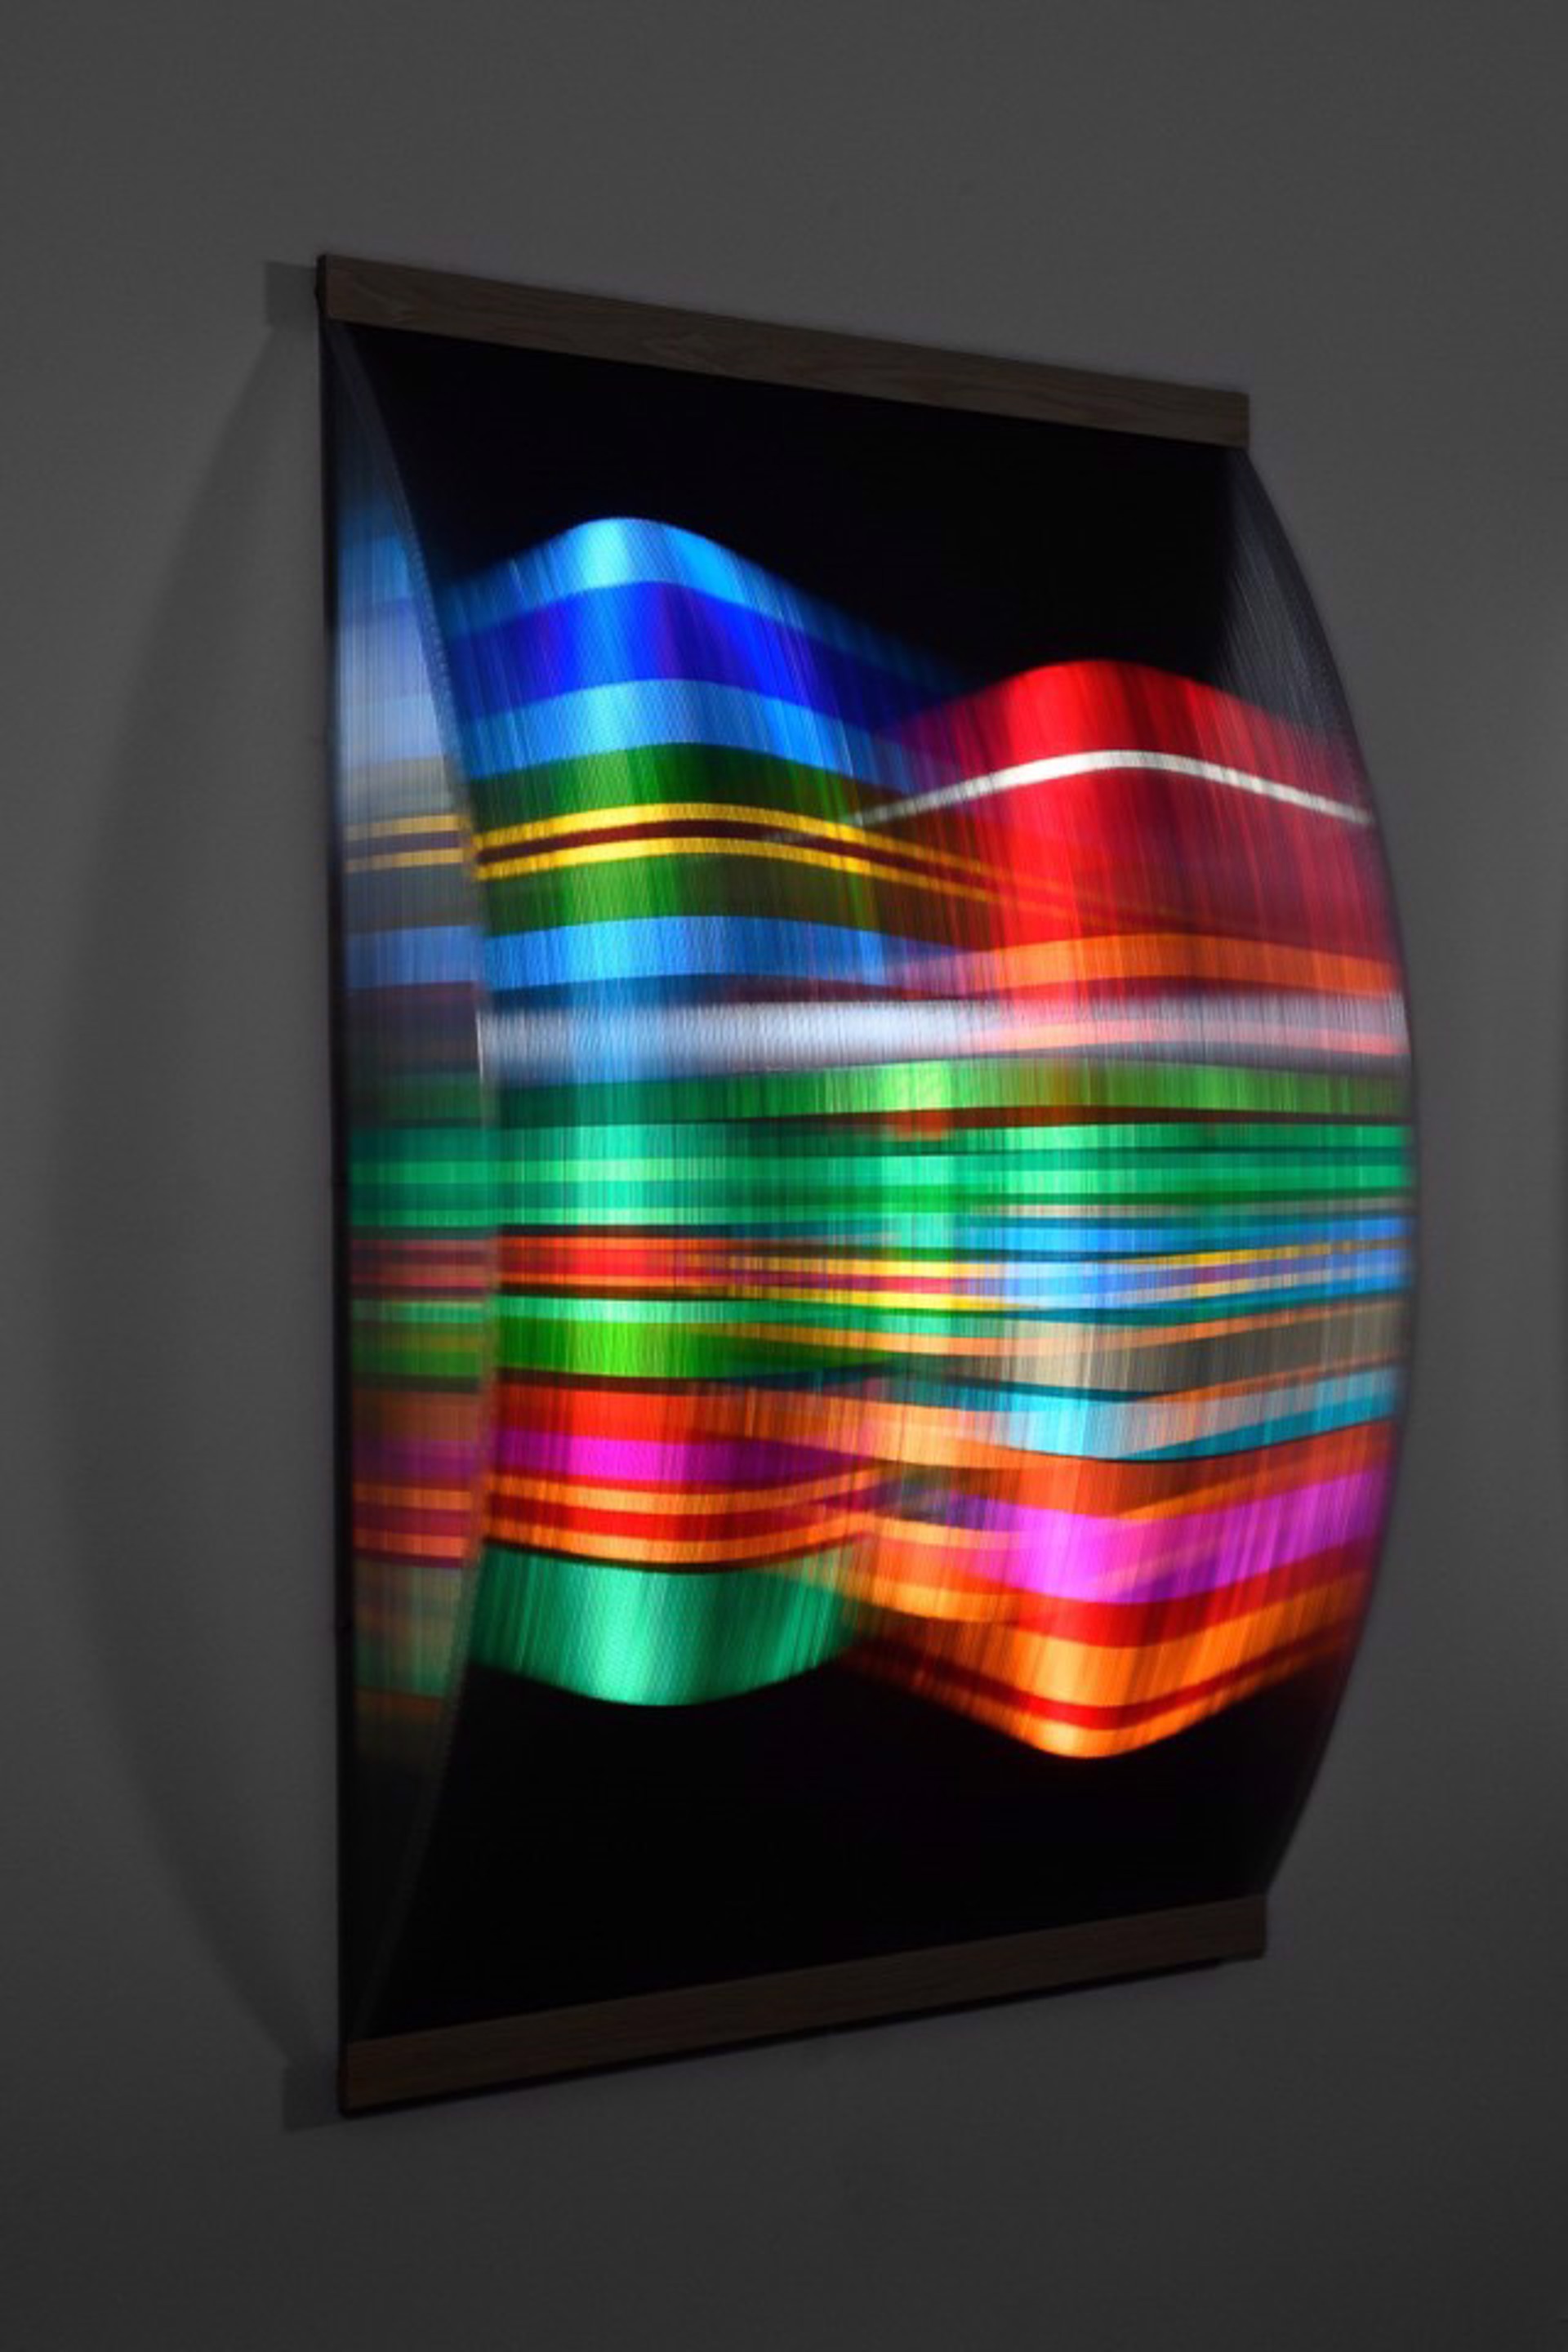 Diffraction Panel #2 by Martin Cail